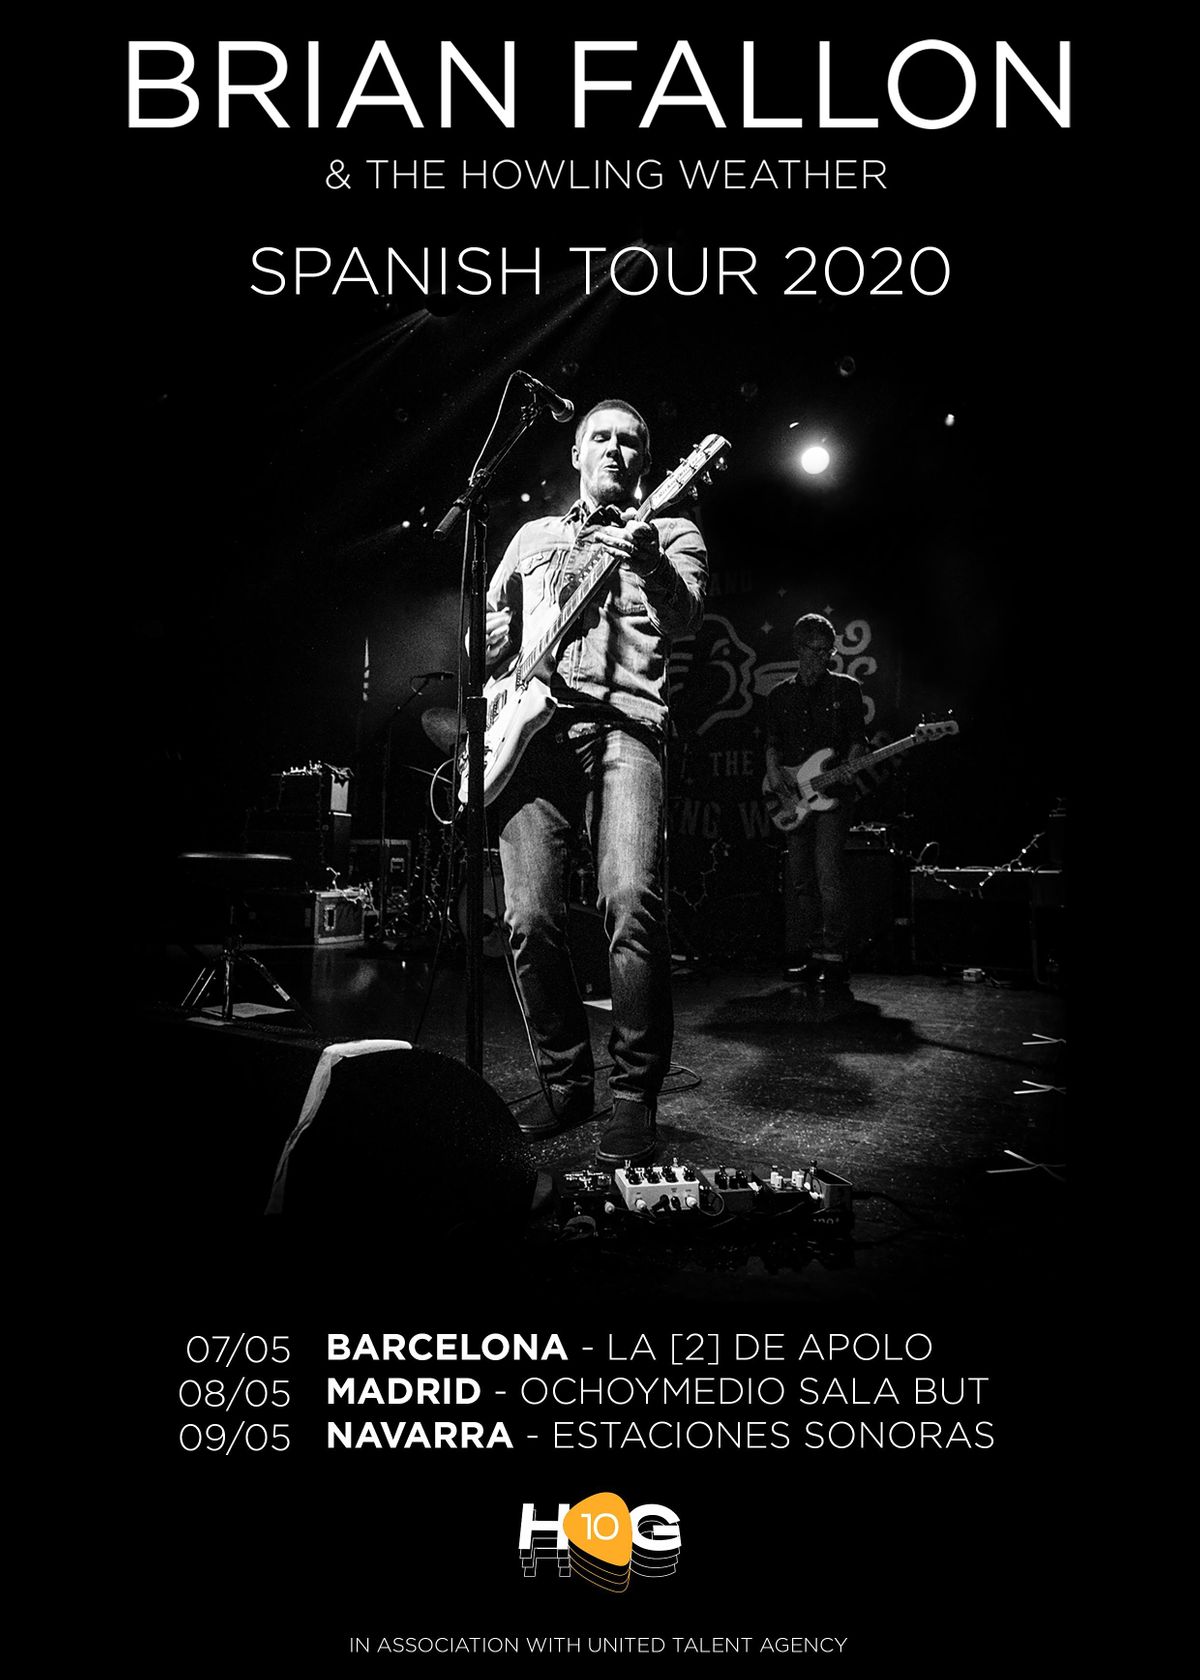 BRIAN FALLON & THE HOWLING WEATHER en MADRID